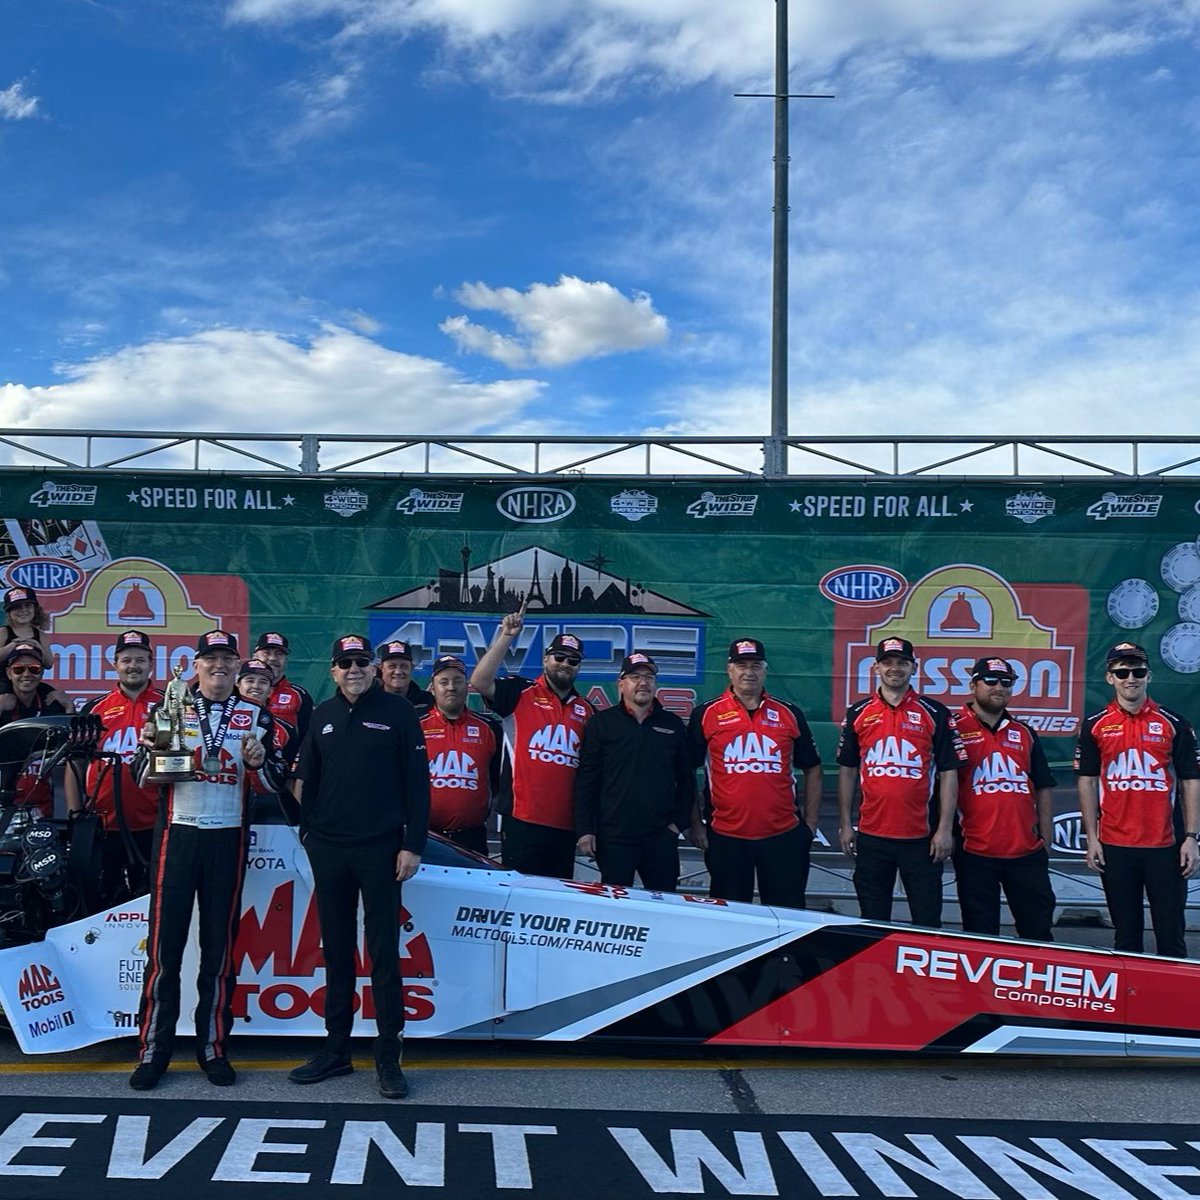 The Champ wins his first race of the year! Join us in congratulating Doug Kalitta on being the No. 1 qualifier and winner at the NHRA 4-Wide Nationals in Las Vegas over the weekend. #ForThoseWhoMakeTheWorld #Vegas4WideNats